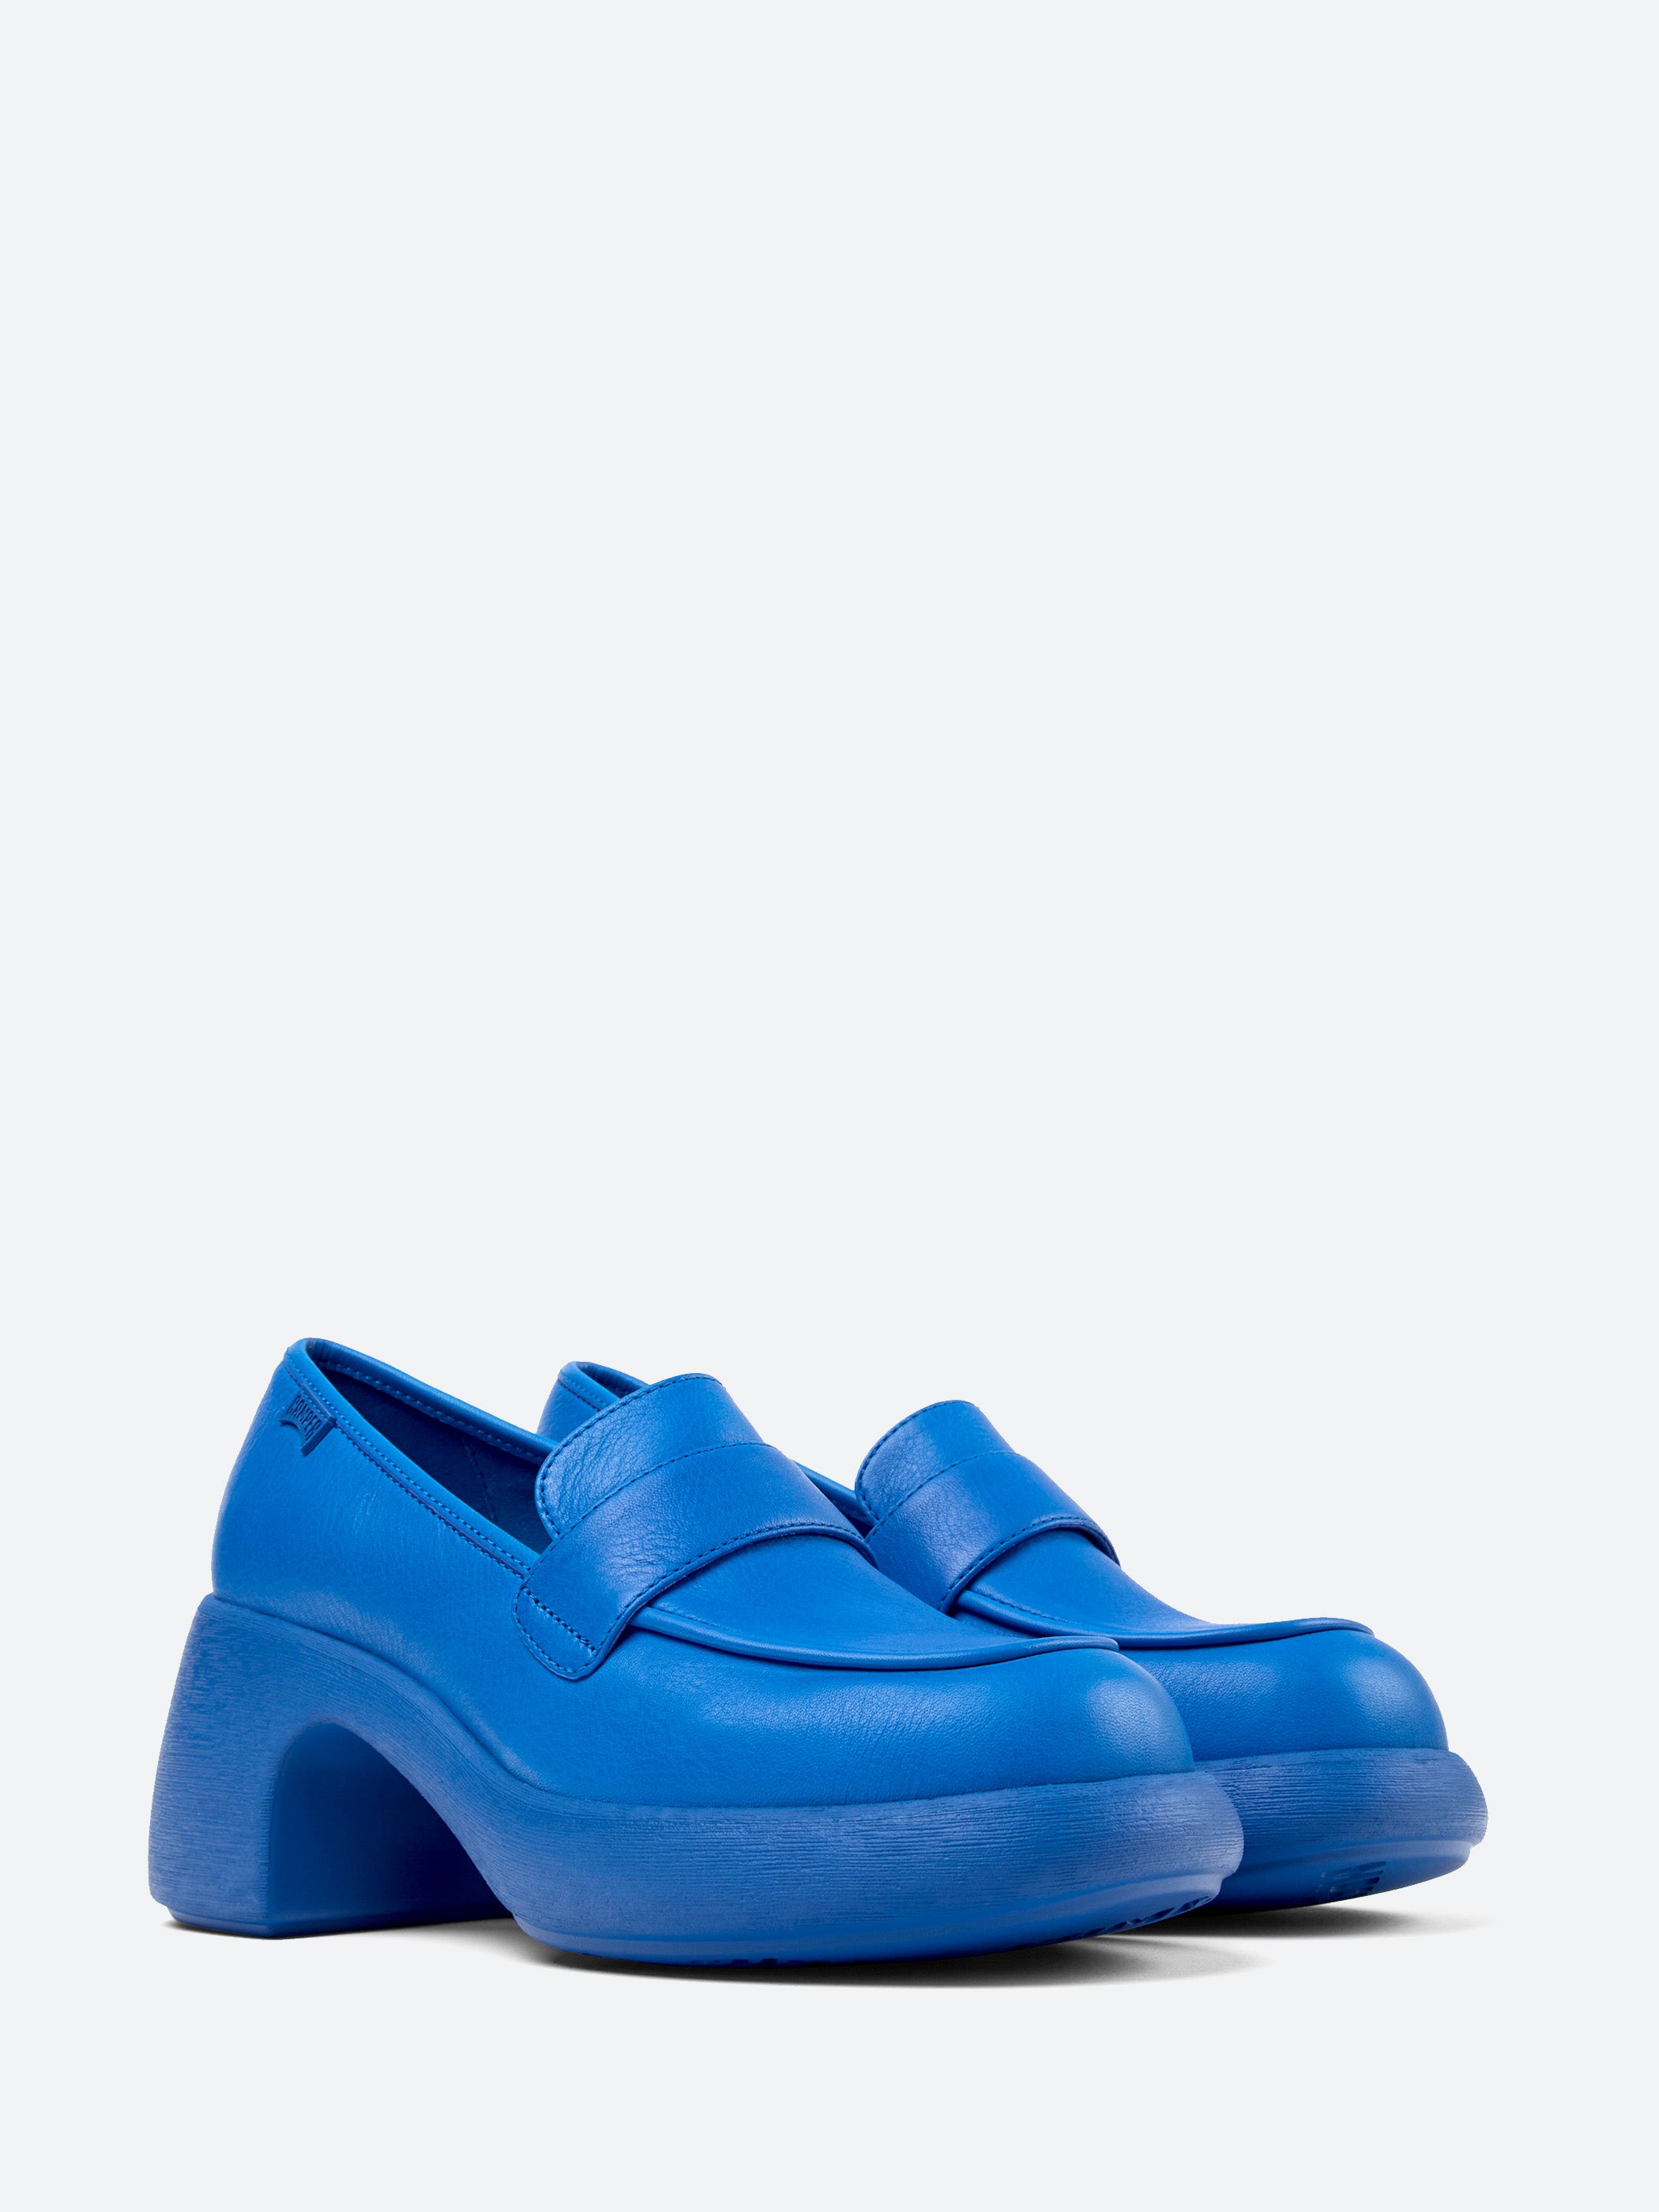 Camper - Thelma Loafers in Blue – gravitypope